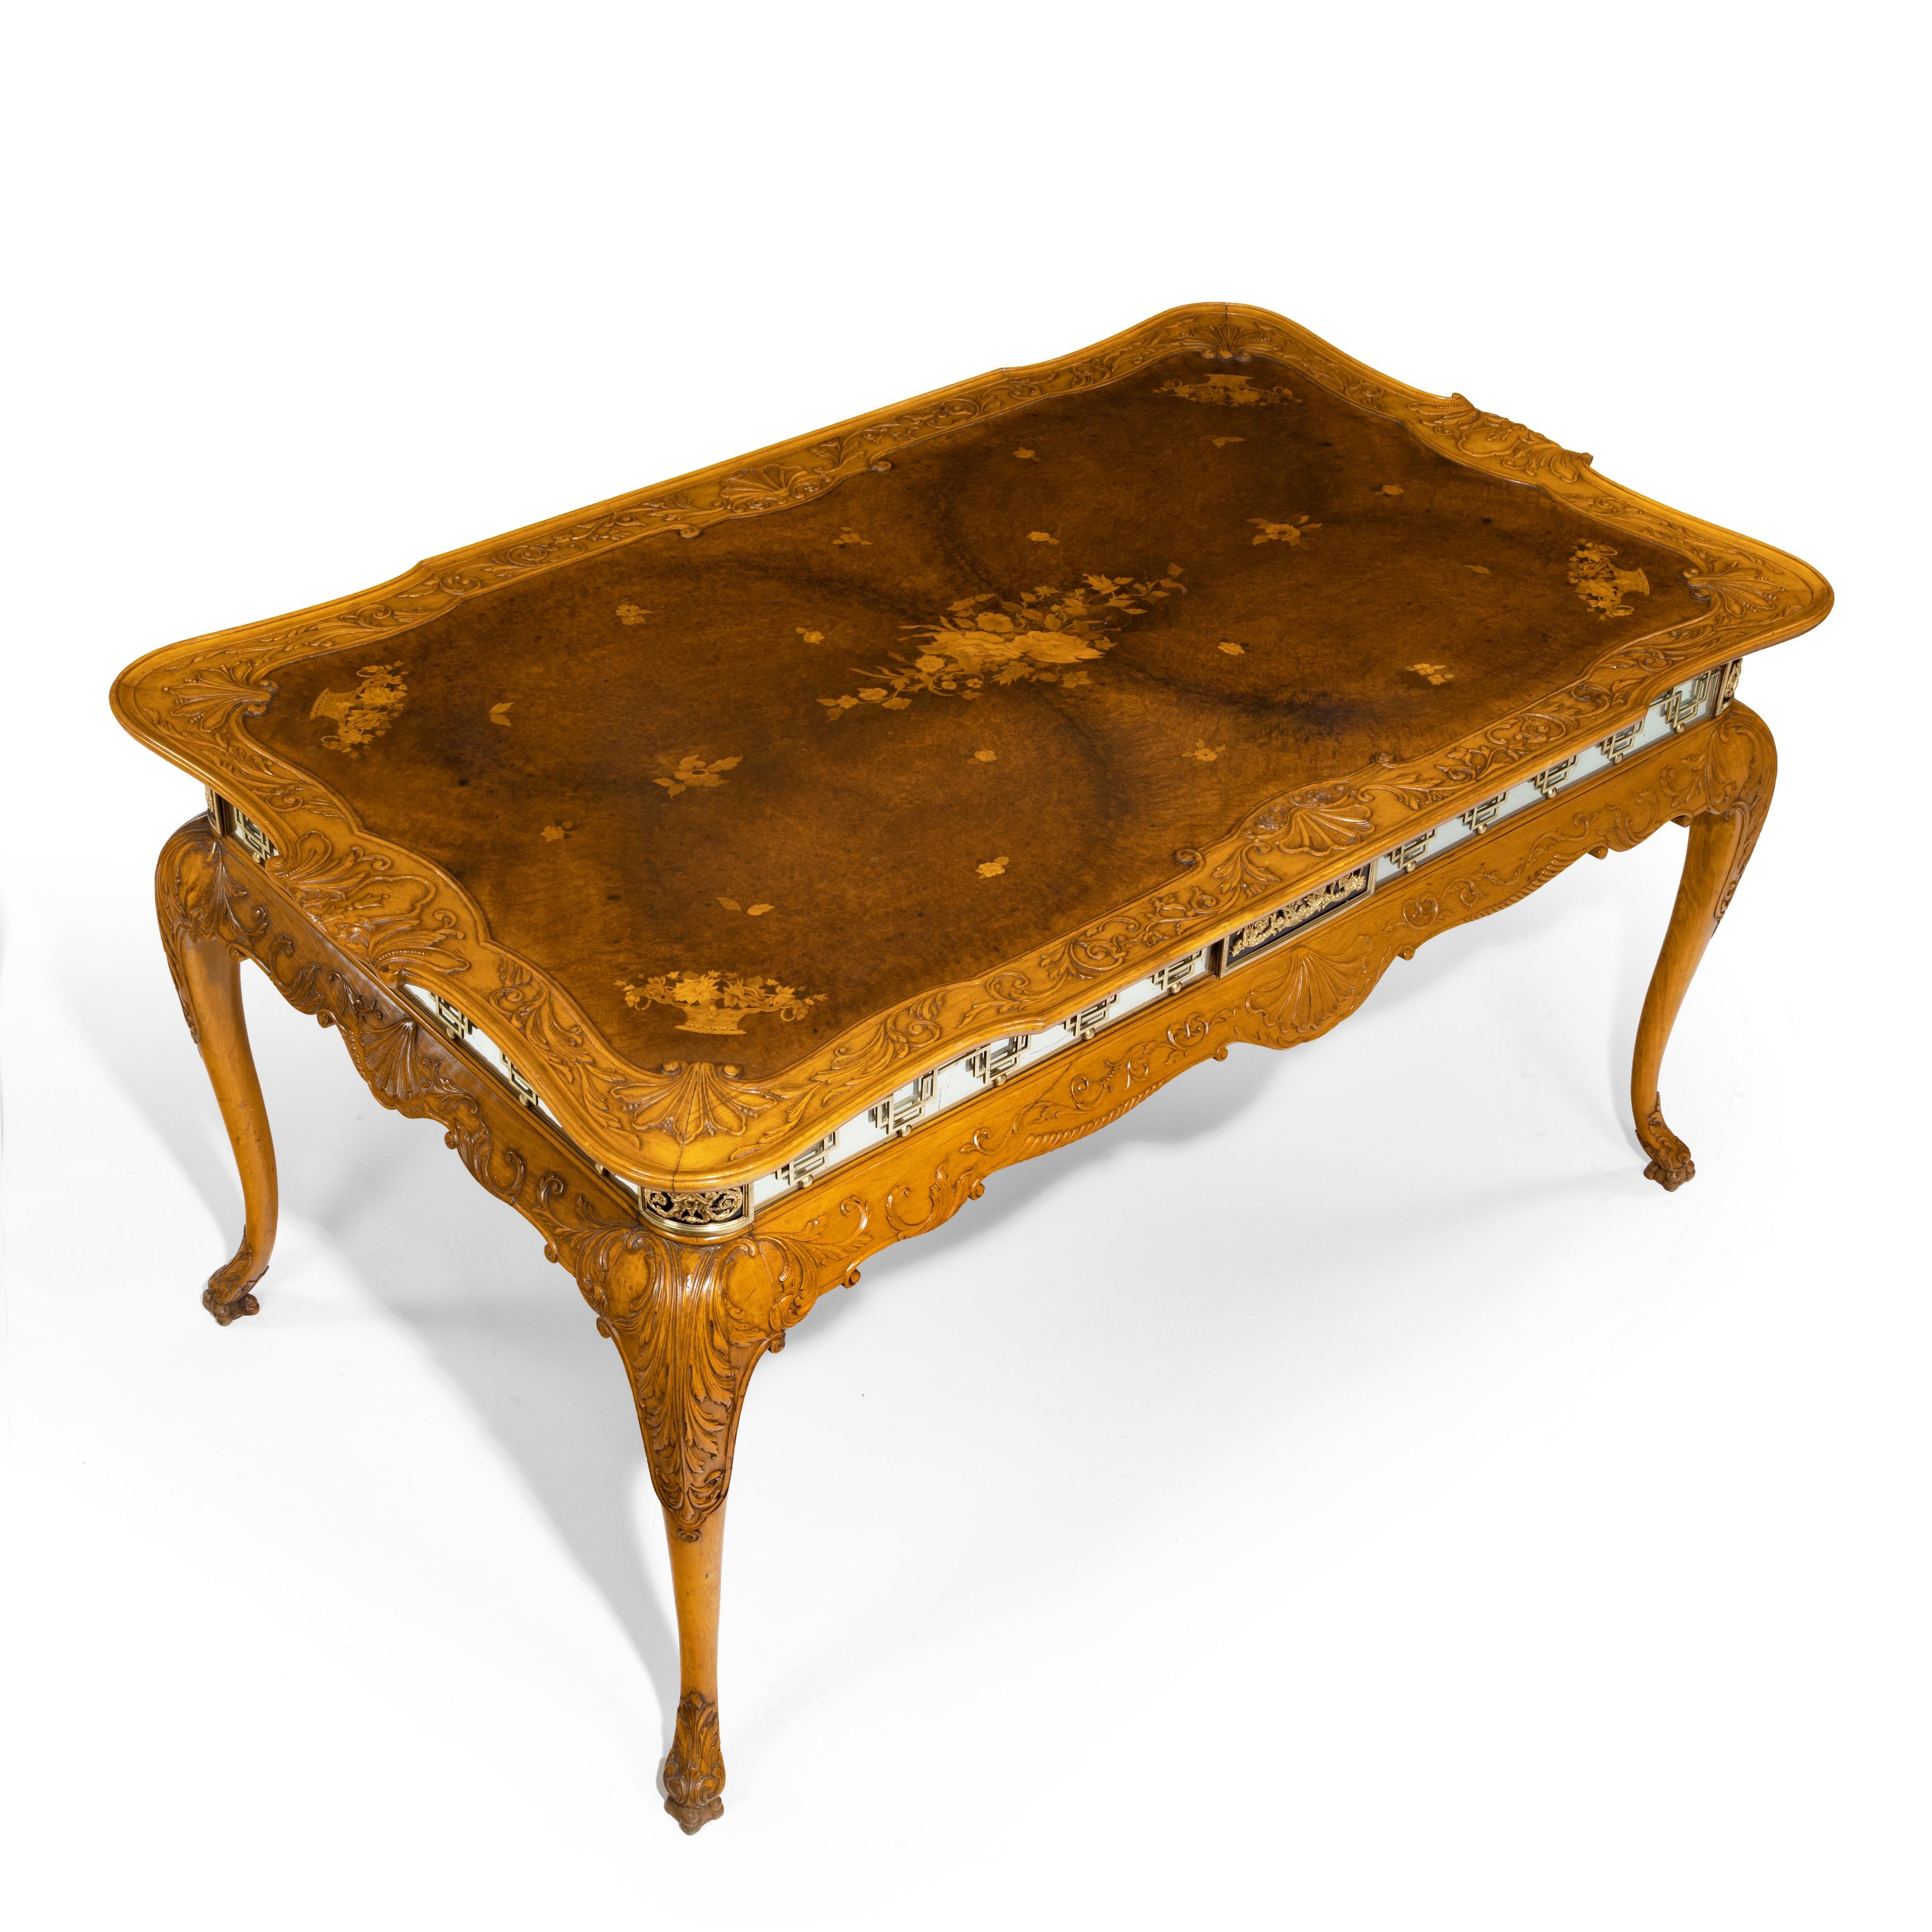 A fine walnut and burr walnut orientalist centre table, of shaped rectangular form with a mirrored frieze, set upon carved cabriole legs terminating in acanthus feet, decorated with quarter veneered top inlaid in boxwood with scattered flower heads